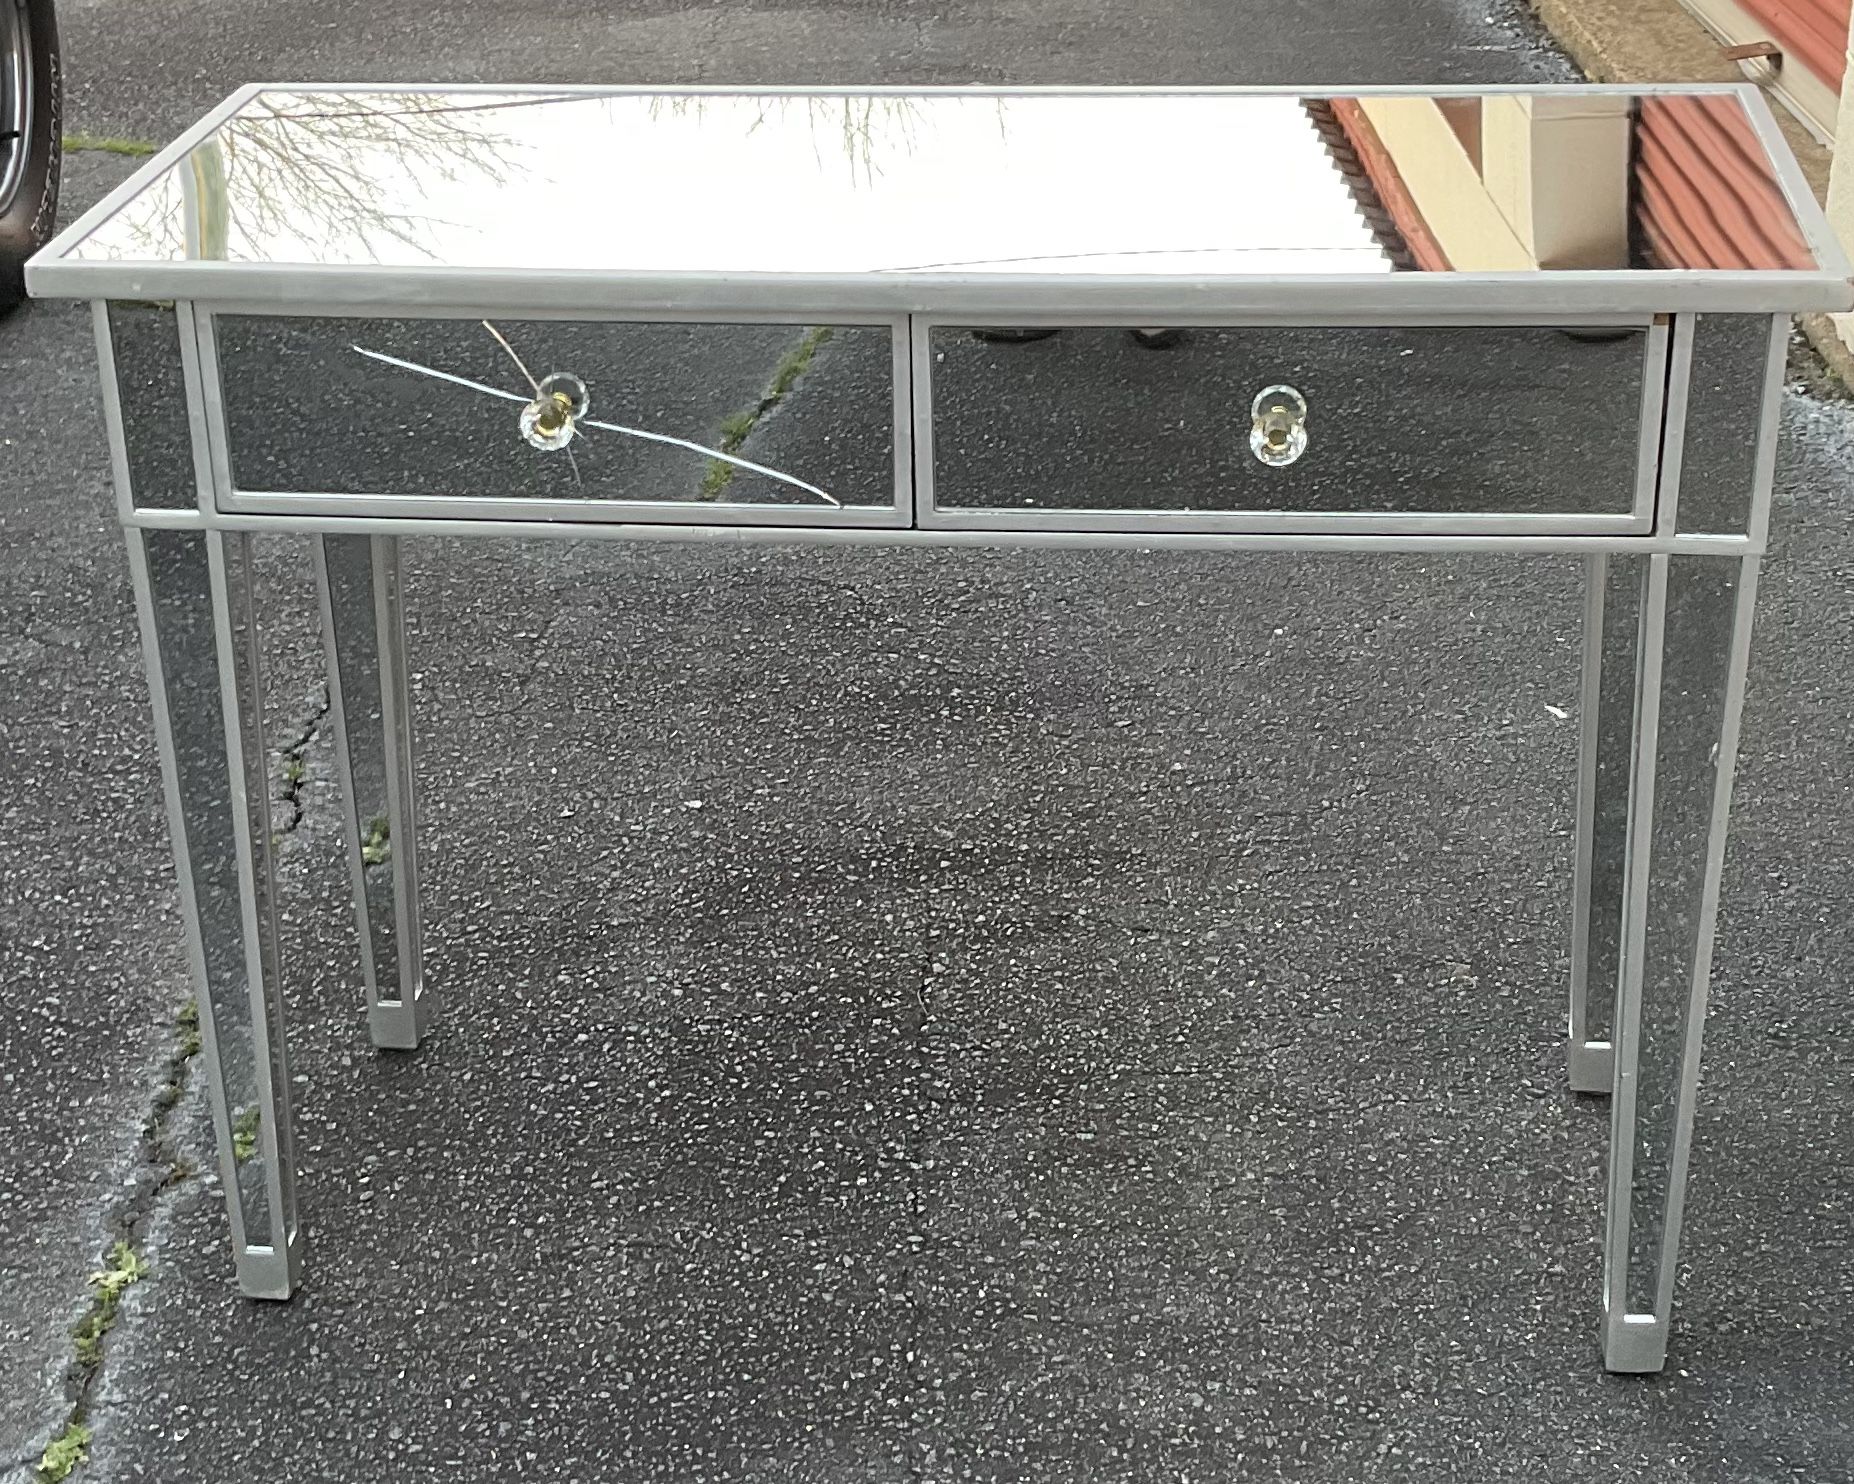 Mirror Glass Table—measurements are 40  inches long  x 28 inches tall  x  18 inches wide -$50 Firm,No Holds